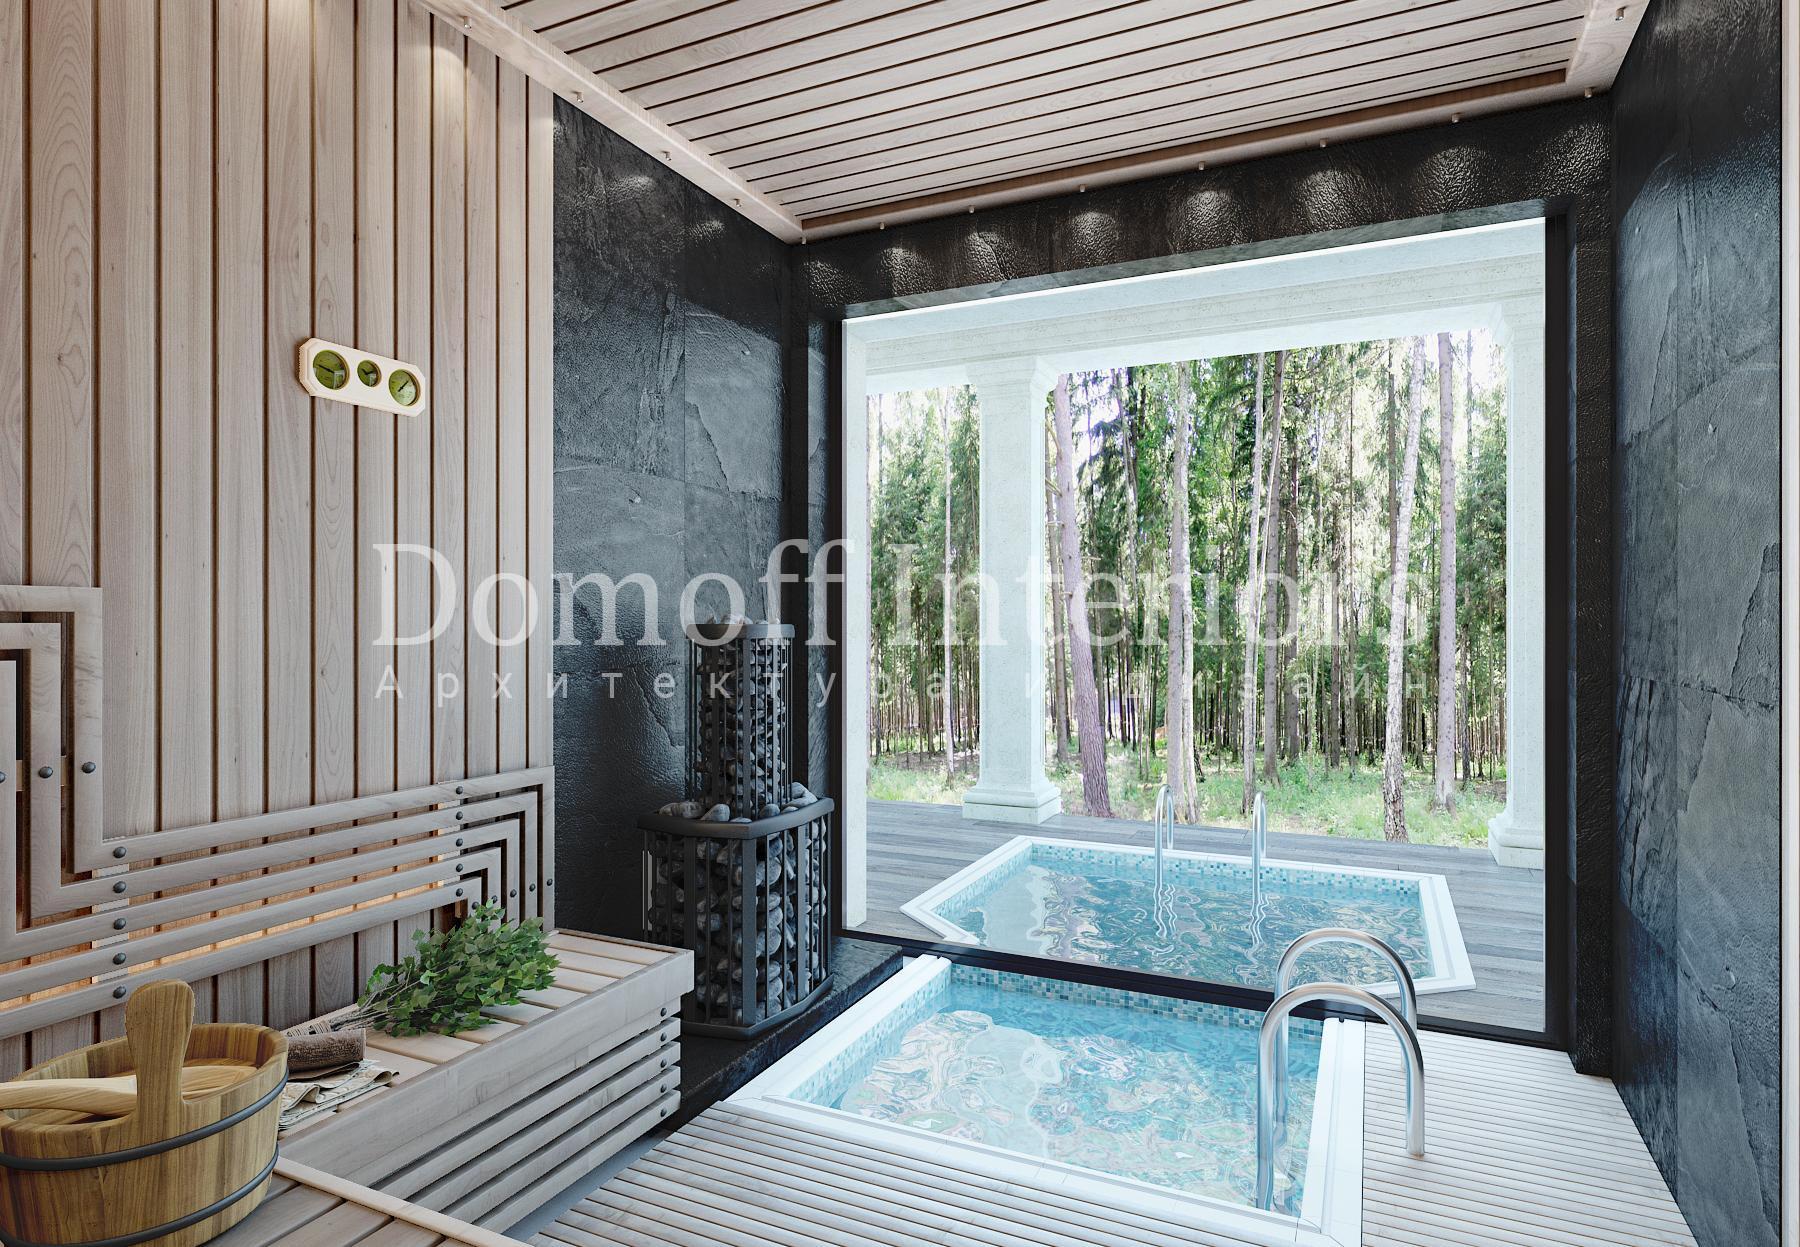 Steam room made in the style of Contemporary Eclecticism